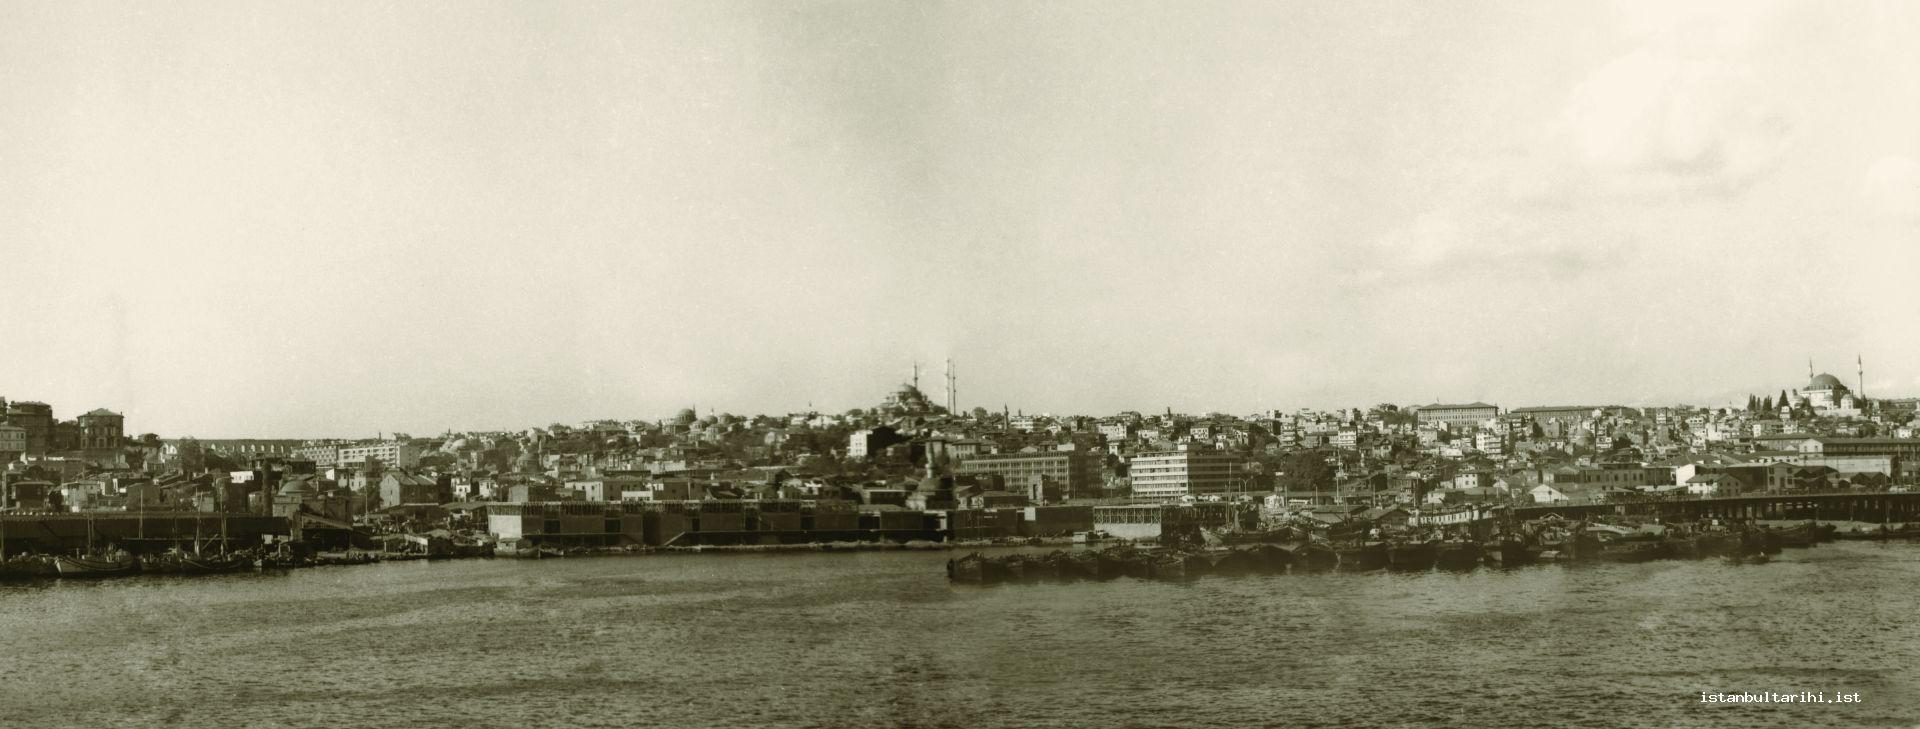 3- The view of Istanbul from the Golden Horn. Süleymaniye Mosque and the Galata Tower designates the skyline